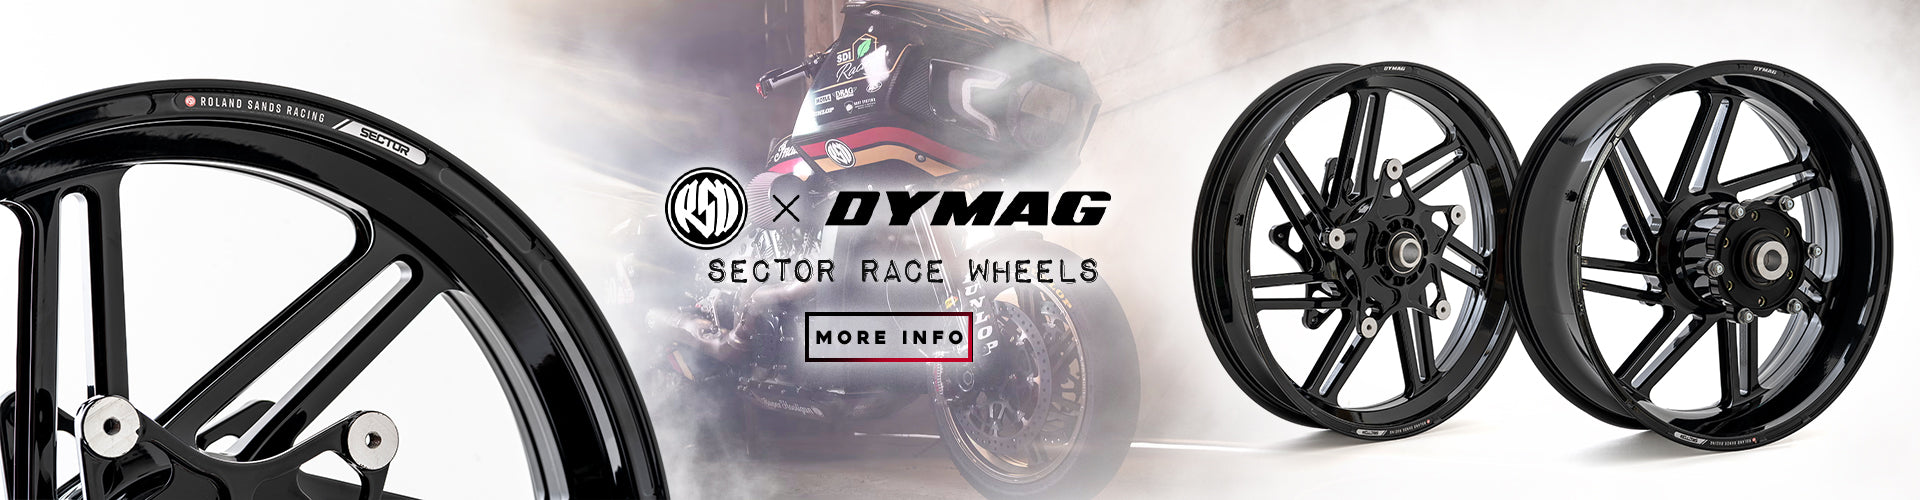 banner of rsd x dymag sector race whees. studio shot showcasing front and rear wheel with a detail image of rim and a bagger race bike in the background. smoke texture around image